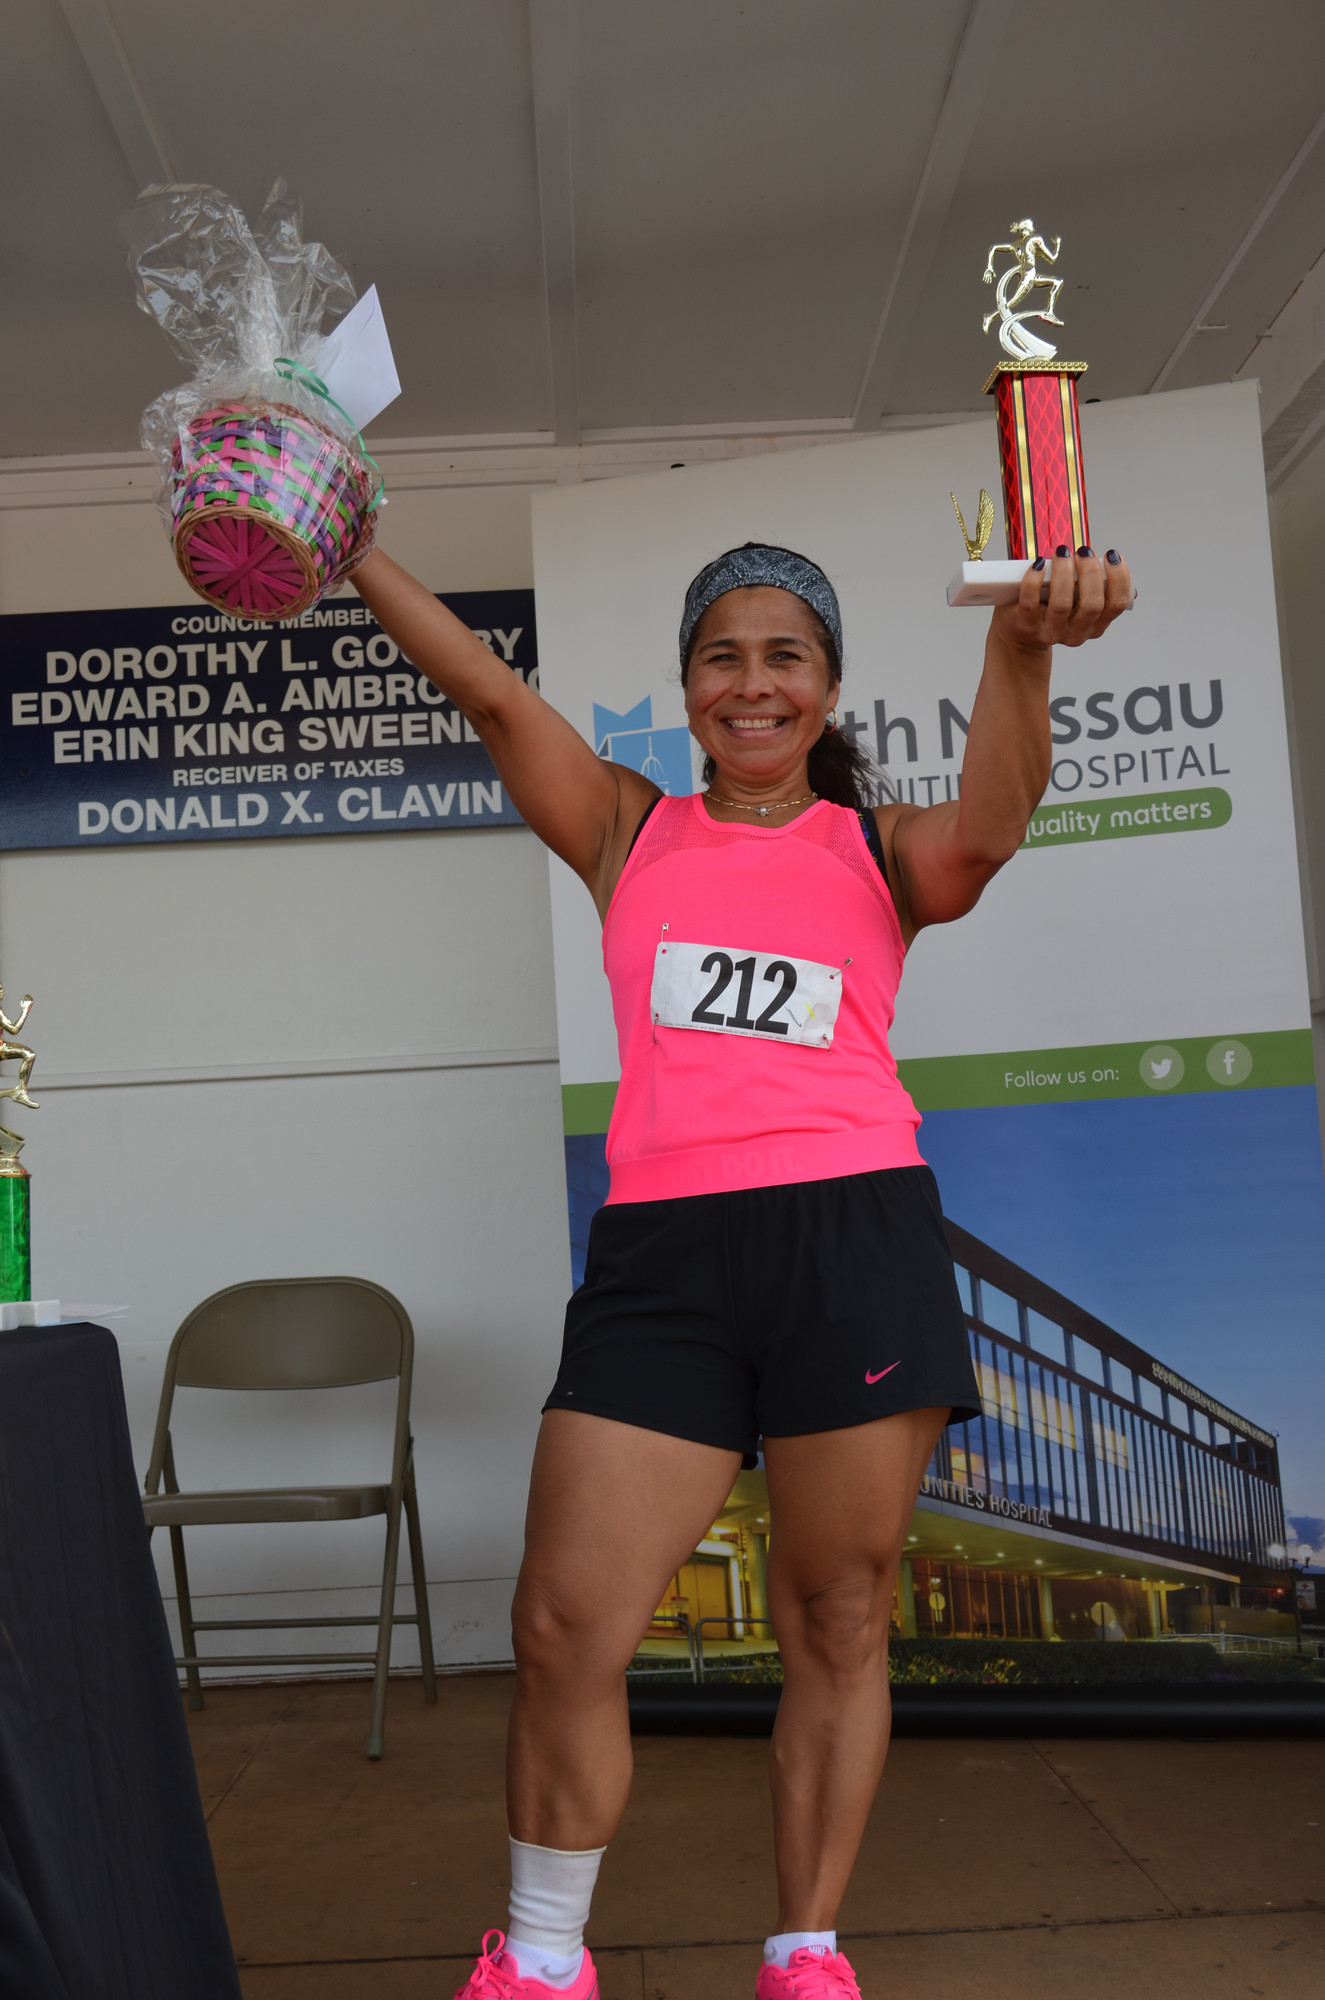 Lilian Reyes of Island Park with her awards. She finished 1st in her age group.